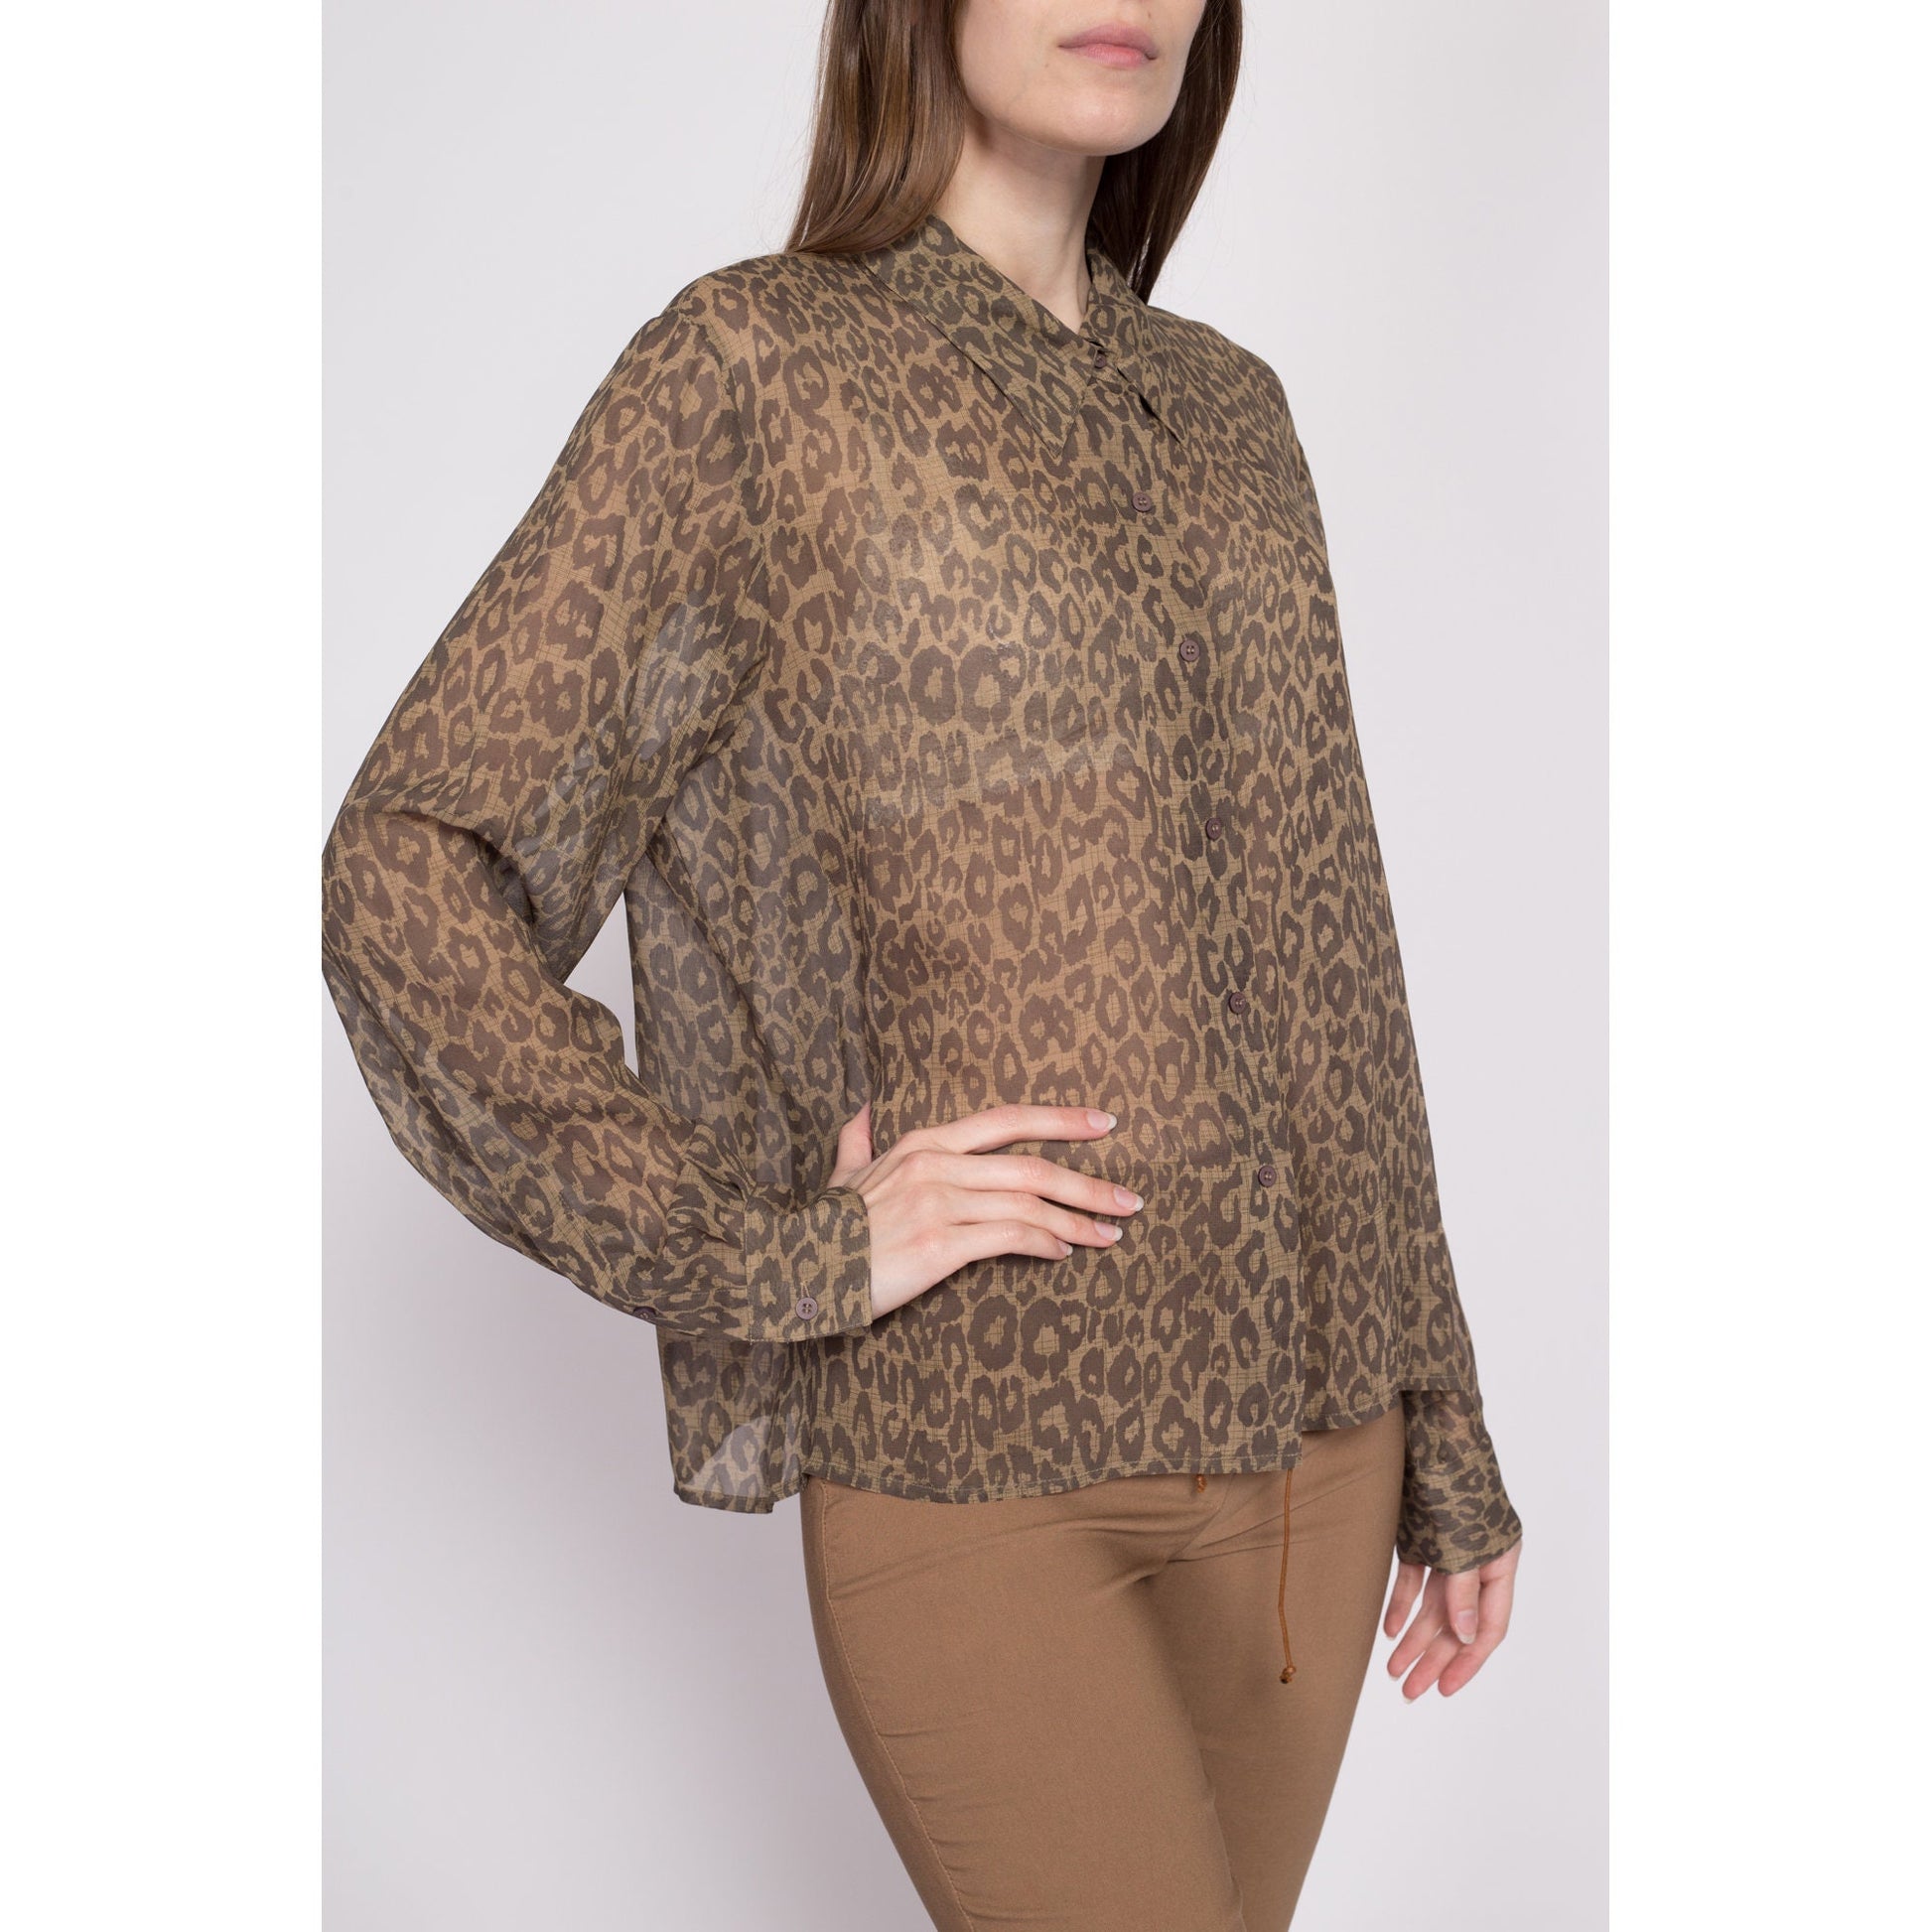 90s Silk Sheer Leopard Print Blouse - Extra Large | Vintage Long Sleeve Collared Button Up Top